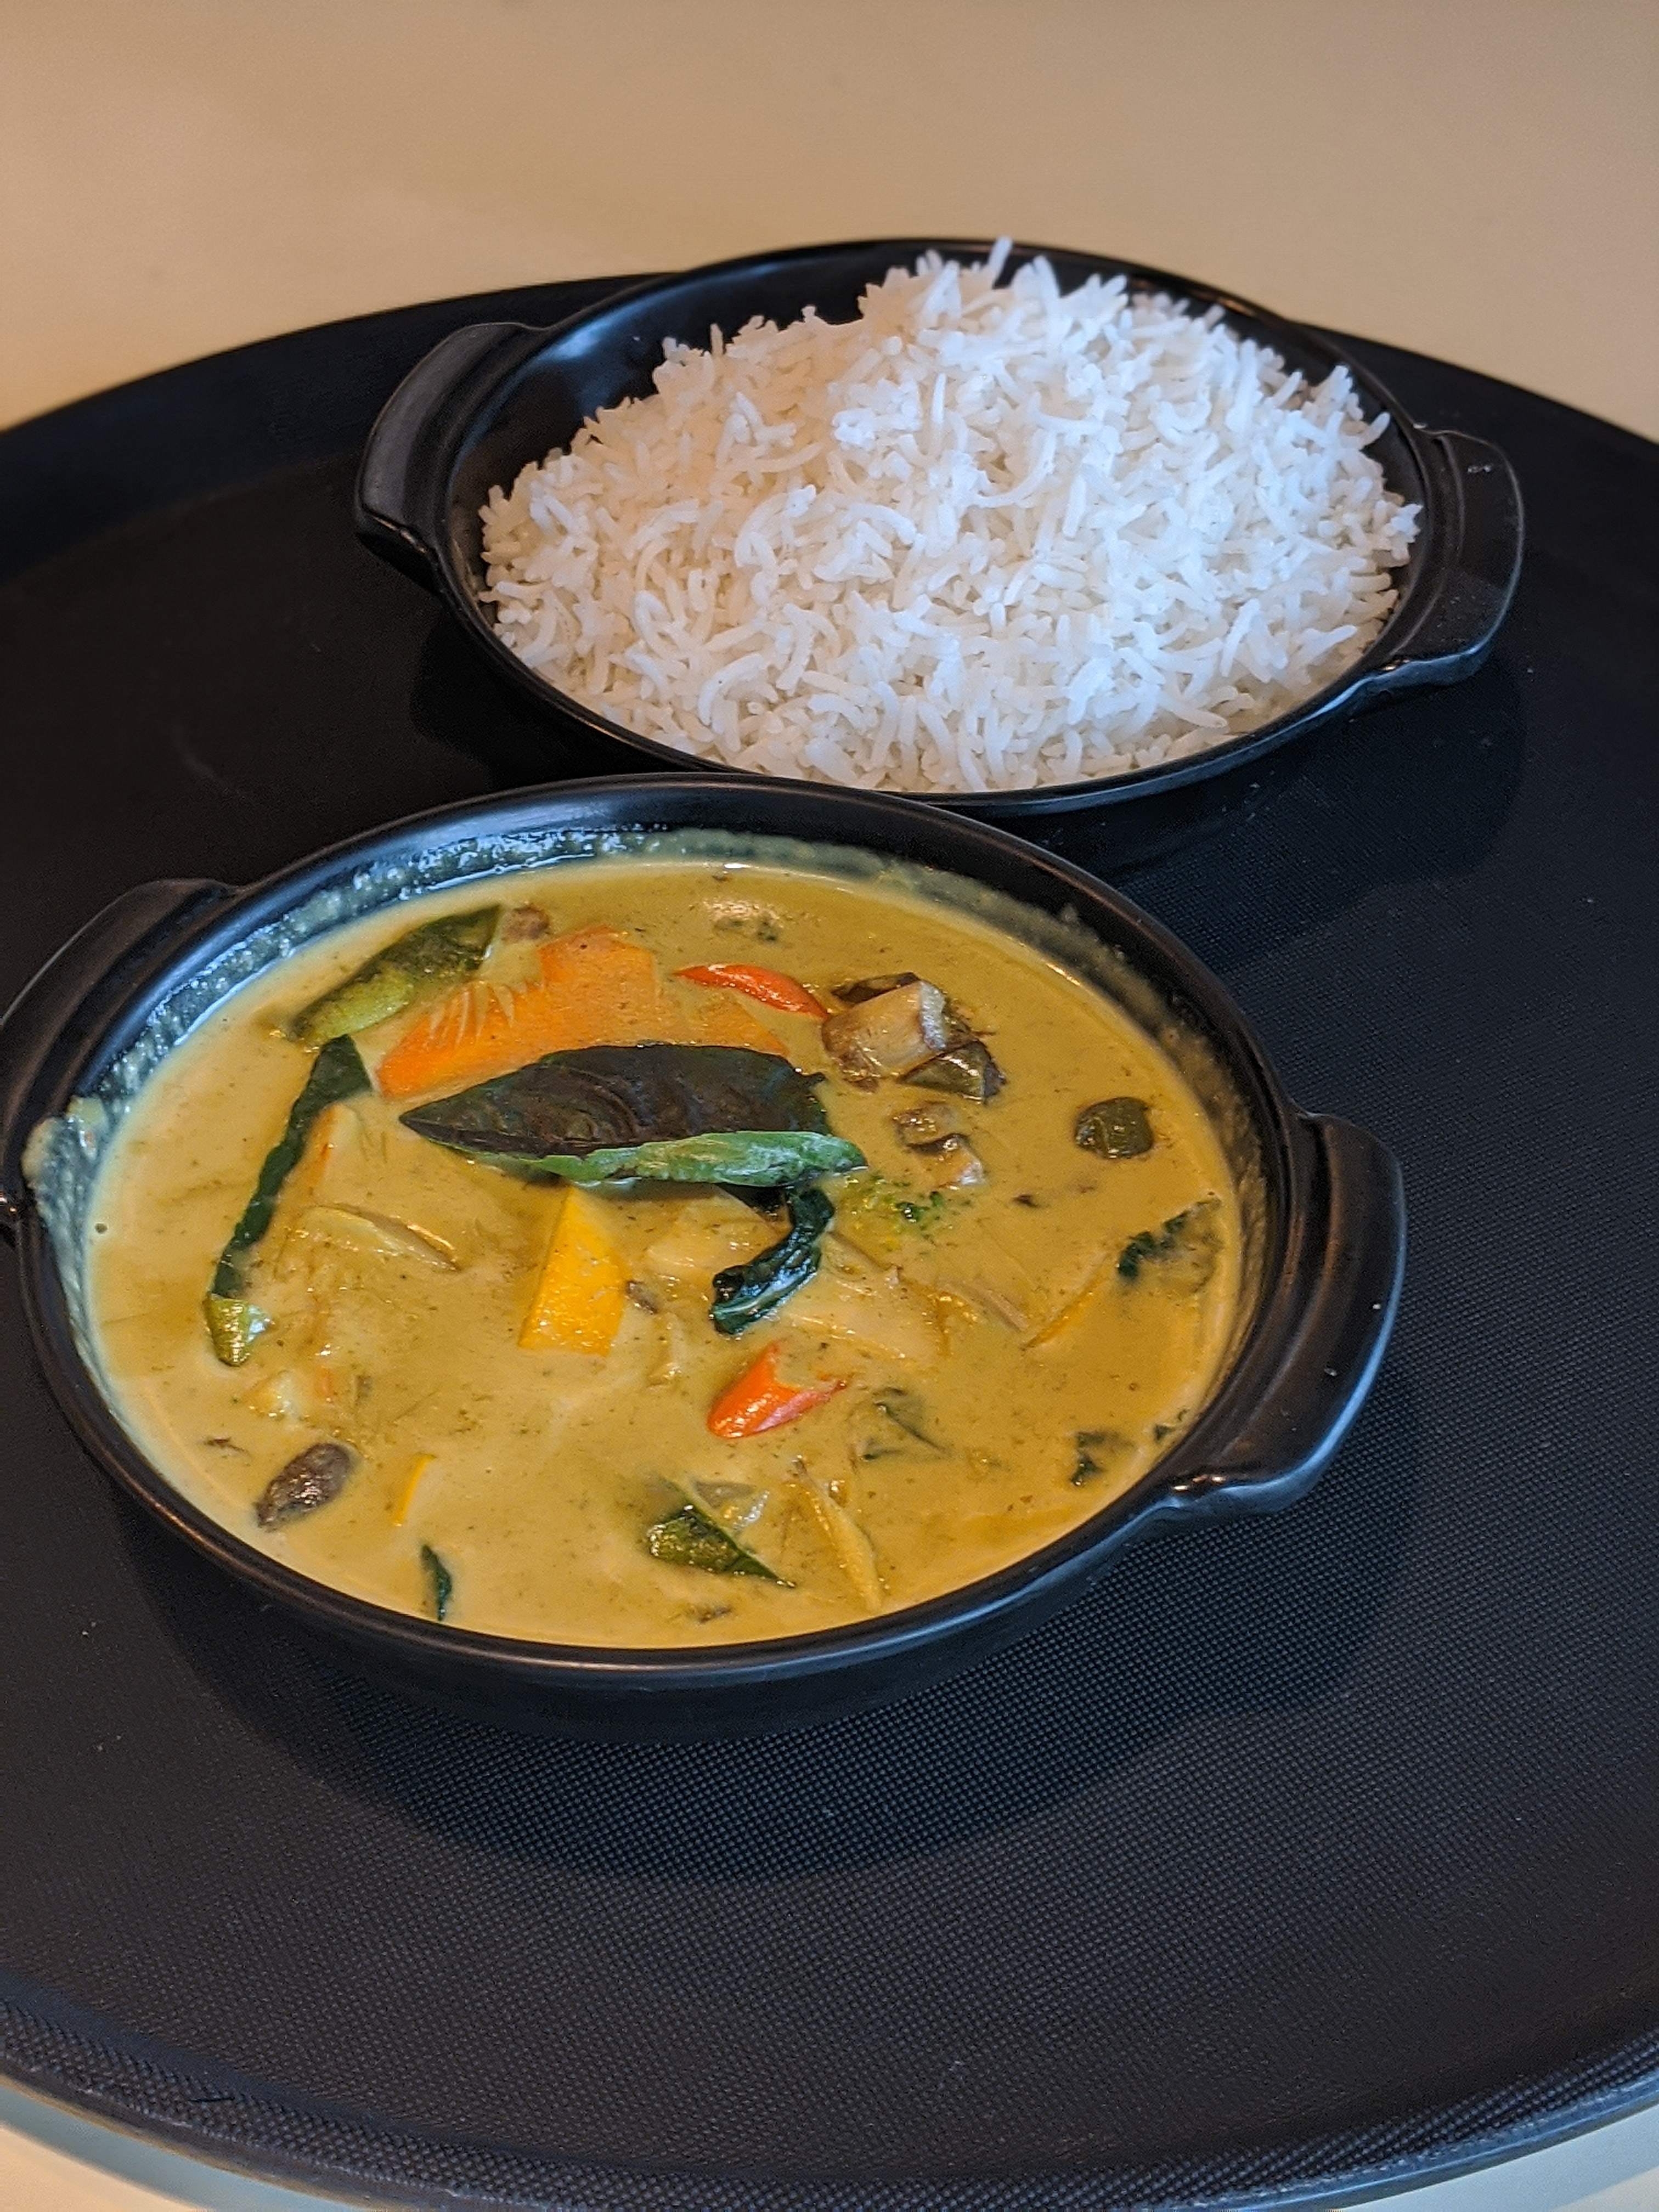 Dish,Food,Yellow curry,Cuisine,Curry,Ingredient,Dal,Red curry,Thai curry,Japanese curry